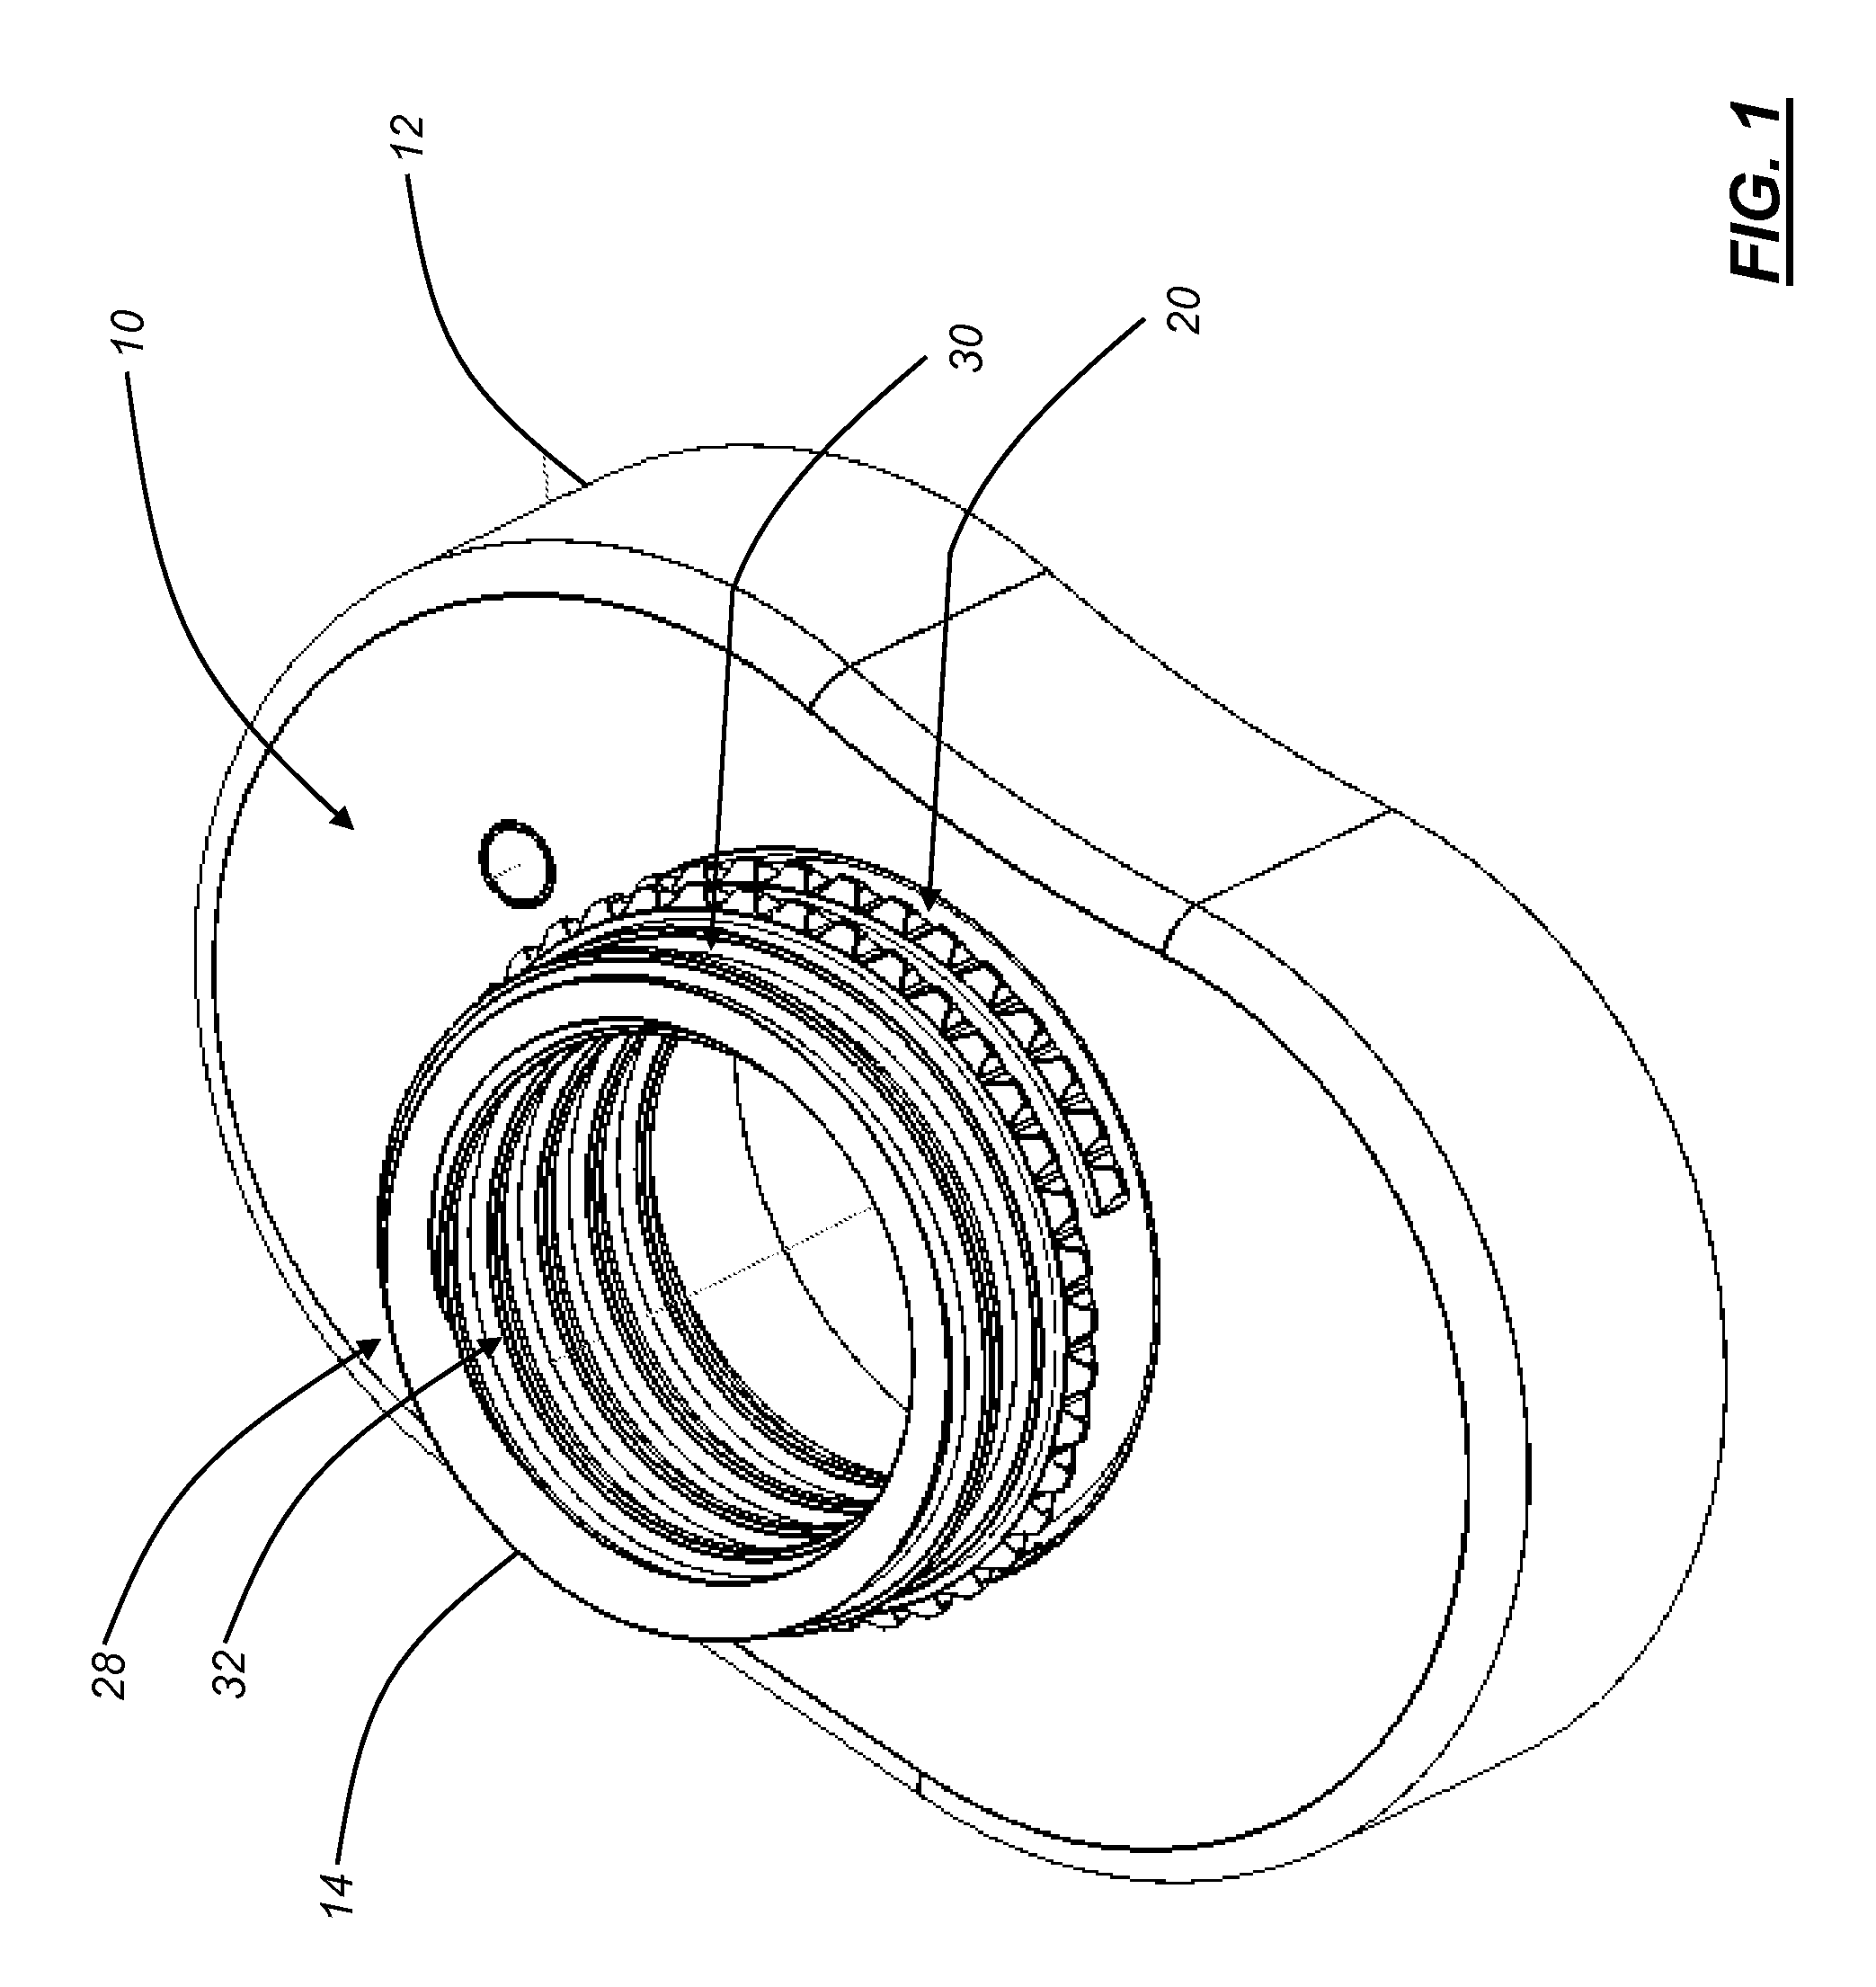 Anterior lumbar interbody fusion cage device and associated method